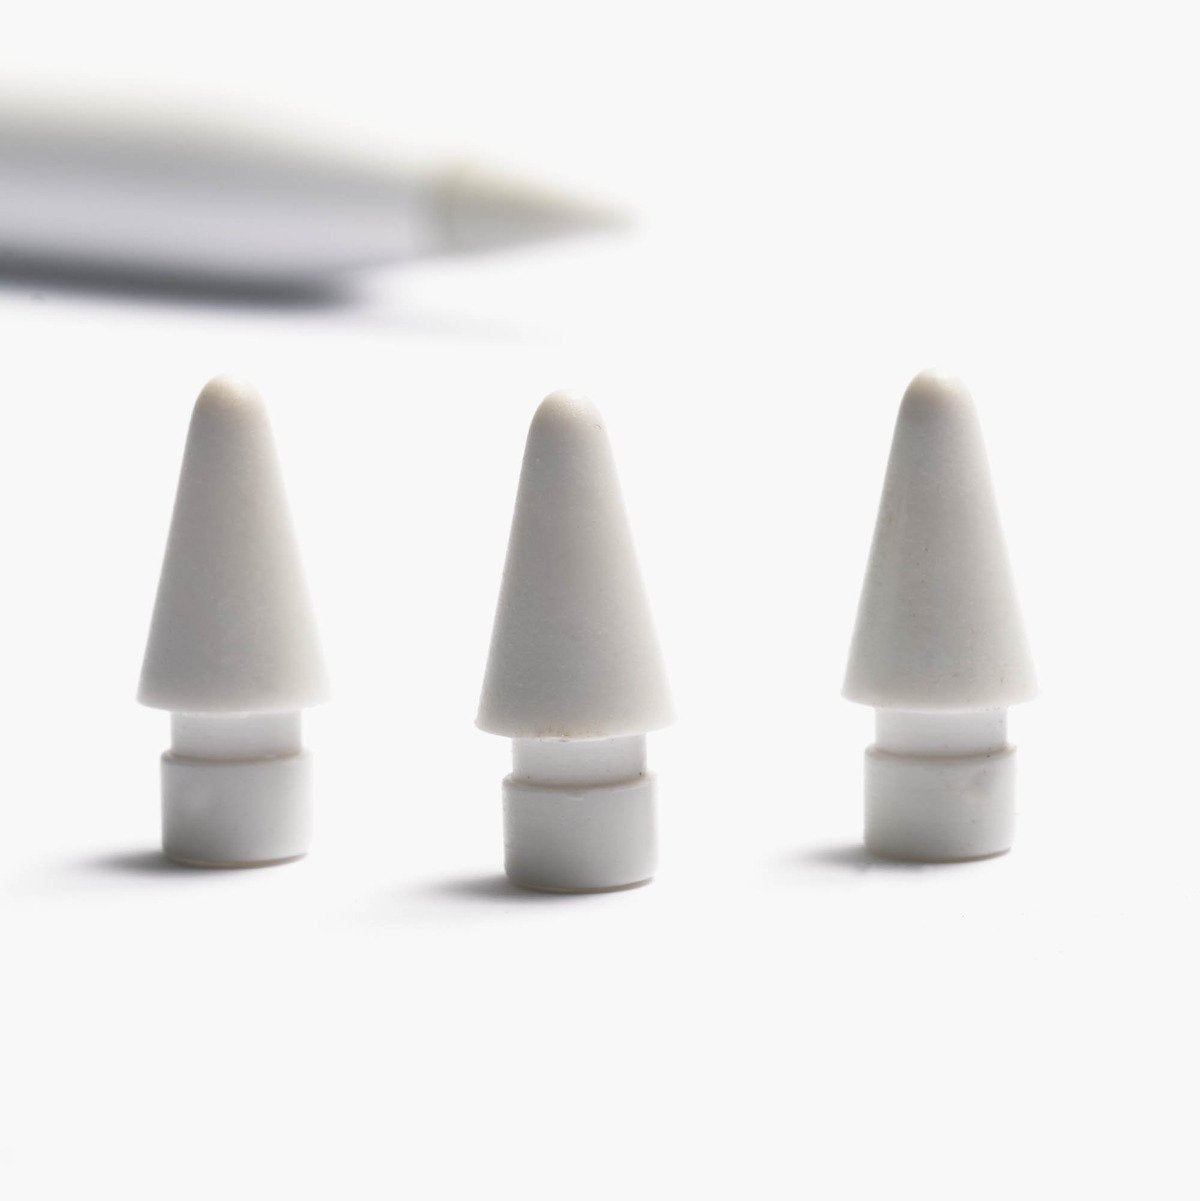 Replacement Apple Pencil Tips - 3 Pack